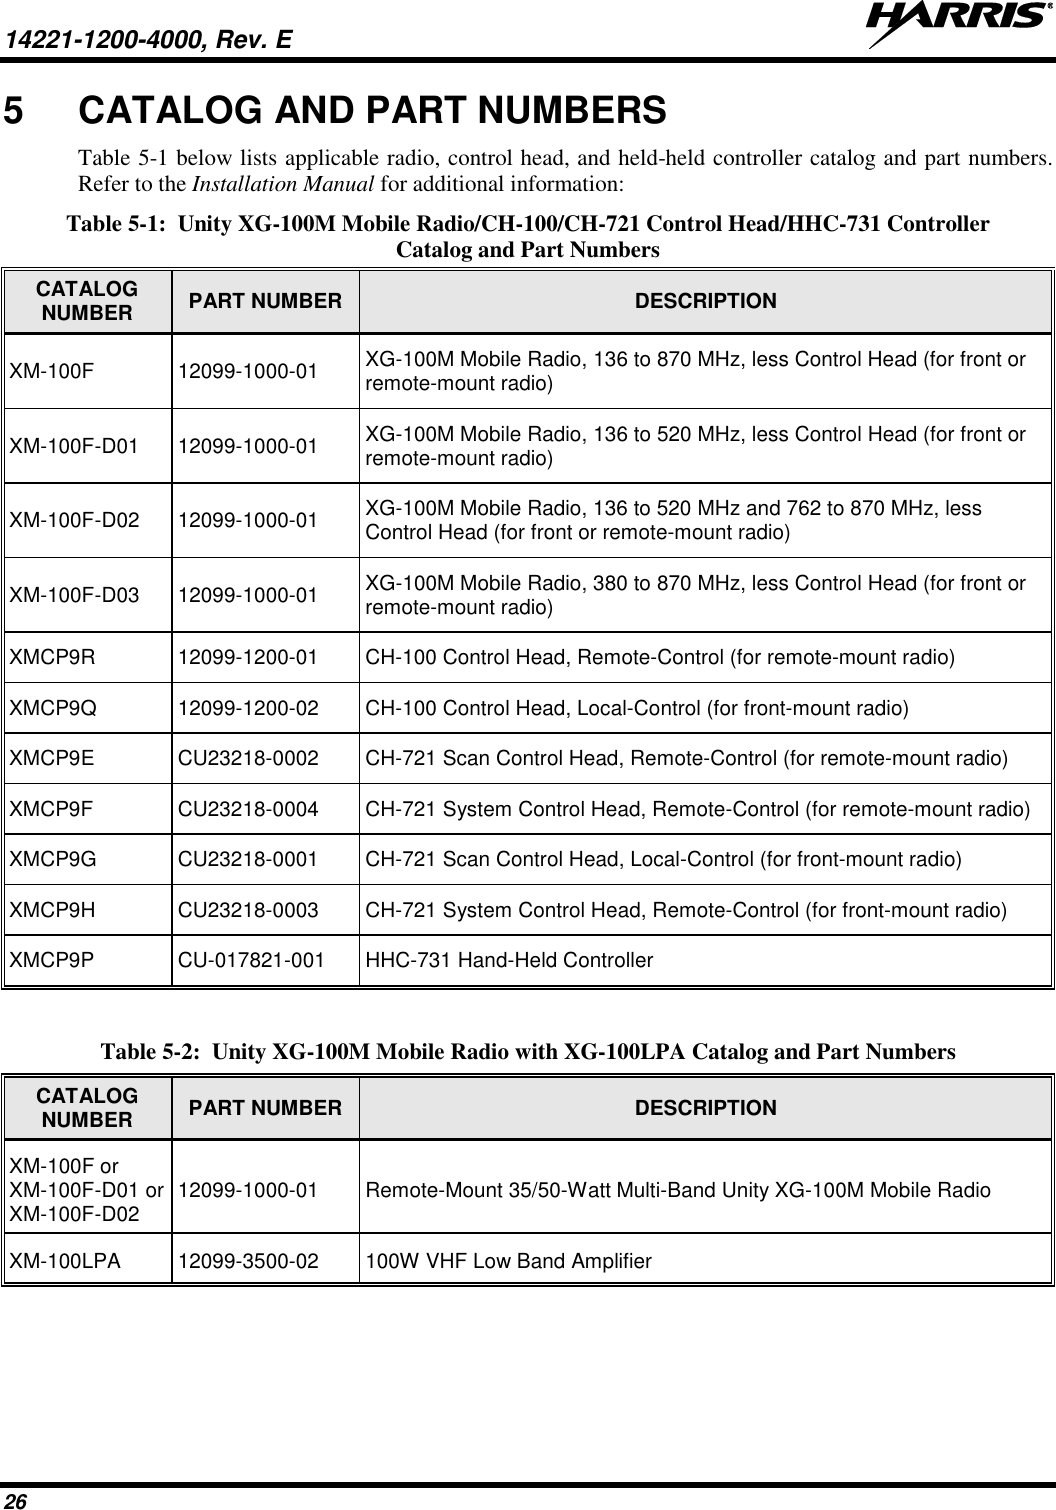 14221-1200-4000, Rev. E    26 5  CATALOG AND PART NUMBERS Table 5-1 below lists applicable radio, control head, and held-held controller catalog and part numbers. Refer to the Installation Manual for additional information: Table 5-1:  Unity XG-100M Mobile Radio/CH-100/CH-721 Control Head/HHC-731 Controller Catalog and Part Numbers CATALOG NUMBER PART NUMBER DESCRIPTION XM-100F 12099-1000-01 XG-100M Mobile Radio, 136 to 870 MHz, less Control Head (for front or remote-mount radio) XM-100F-D01 12099-1000-01 XG-100M Mobile Radio, 136 to 520 MHz, less Control Head (for front or remote-mount radio) XM-100F-D02 12099-1000-01 XG-100M Mobile Radio, 136 to 520 MHz and 762 to 870 MHz, less Control Head (for front or remote-mount radio) XM-100F-D03 12099-1000-01 XG-100M Mobile Radio, 380 to 870 MHz, less Control Head (for front or remote-mount radio) XMCP9R 12099-1200-01 CH-100 Control Head, Remote-Control (for remote-mount radio) XMCP9Q 12099-1200-02 CH-100 Control Head, Local-Control (for front-mount radio) XMCP9E CU23218-0002 CH-721 Scan Control Head, Remote-Control (for remote-mount radio) XMCP9F CU23218-0004 CH-721 System Control Head, Remote-Control (for remote-mount radio) XMCP9G CU23218-0001 CH-721 Scan Control Head, Local-Control (for front-mount radio) XMCP9H CU23218-0003 CH-721 System Control Head, Remote-Control (for front-mount radio) XMCP9P CU-017821-001 HHC-731 Hand-Held Controller  Table 5-2:  Unity XG-100M Mobile Radio with XG-100LPA Catalog and Part Numbers CATALOG NUMBER PART NUMBER DESCRIPTION XM-100F or XM-100F-D01 or XM-100F-D02 12099-1000-01 Remote-Mount 35/50-Watt Multi-Band Unity XG-100M Mobile Radio XM-100LPA 12099-3500-02 100W VHF Low Band Amplifier  